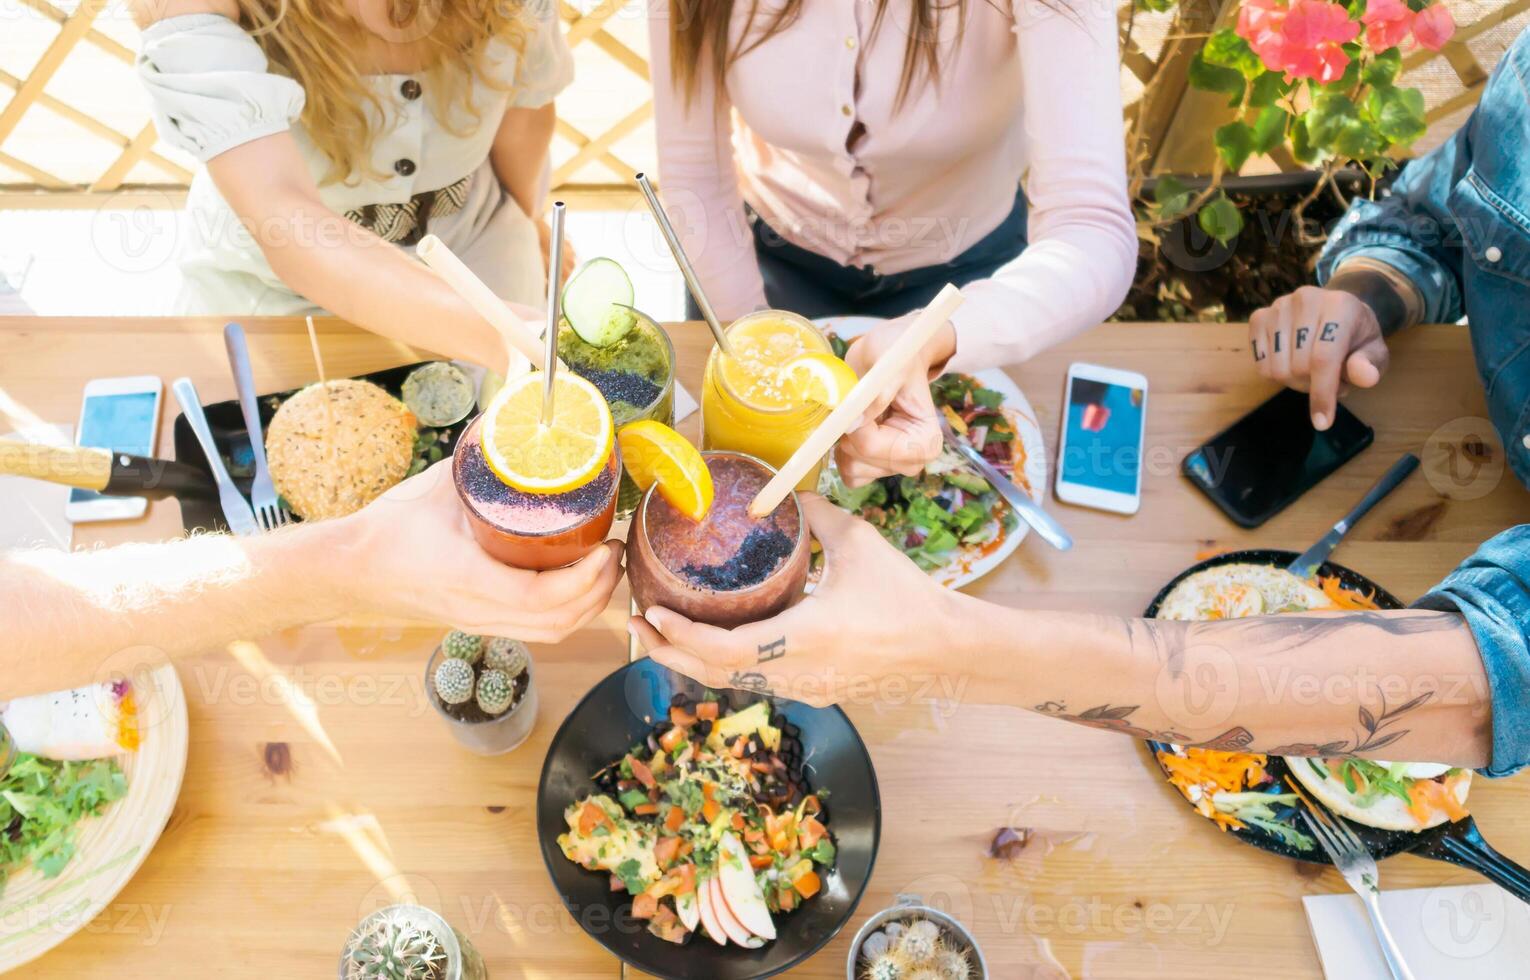 Happy friends cheering with fresh smoothies while lunching together - Young people having fun eating in coffee brunch vintage bar - Healthy food trends and youth lifestyle culture concept photo